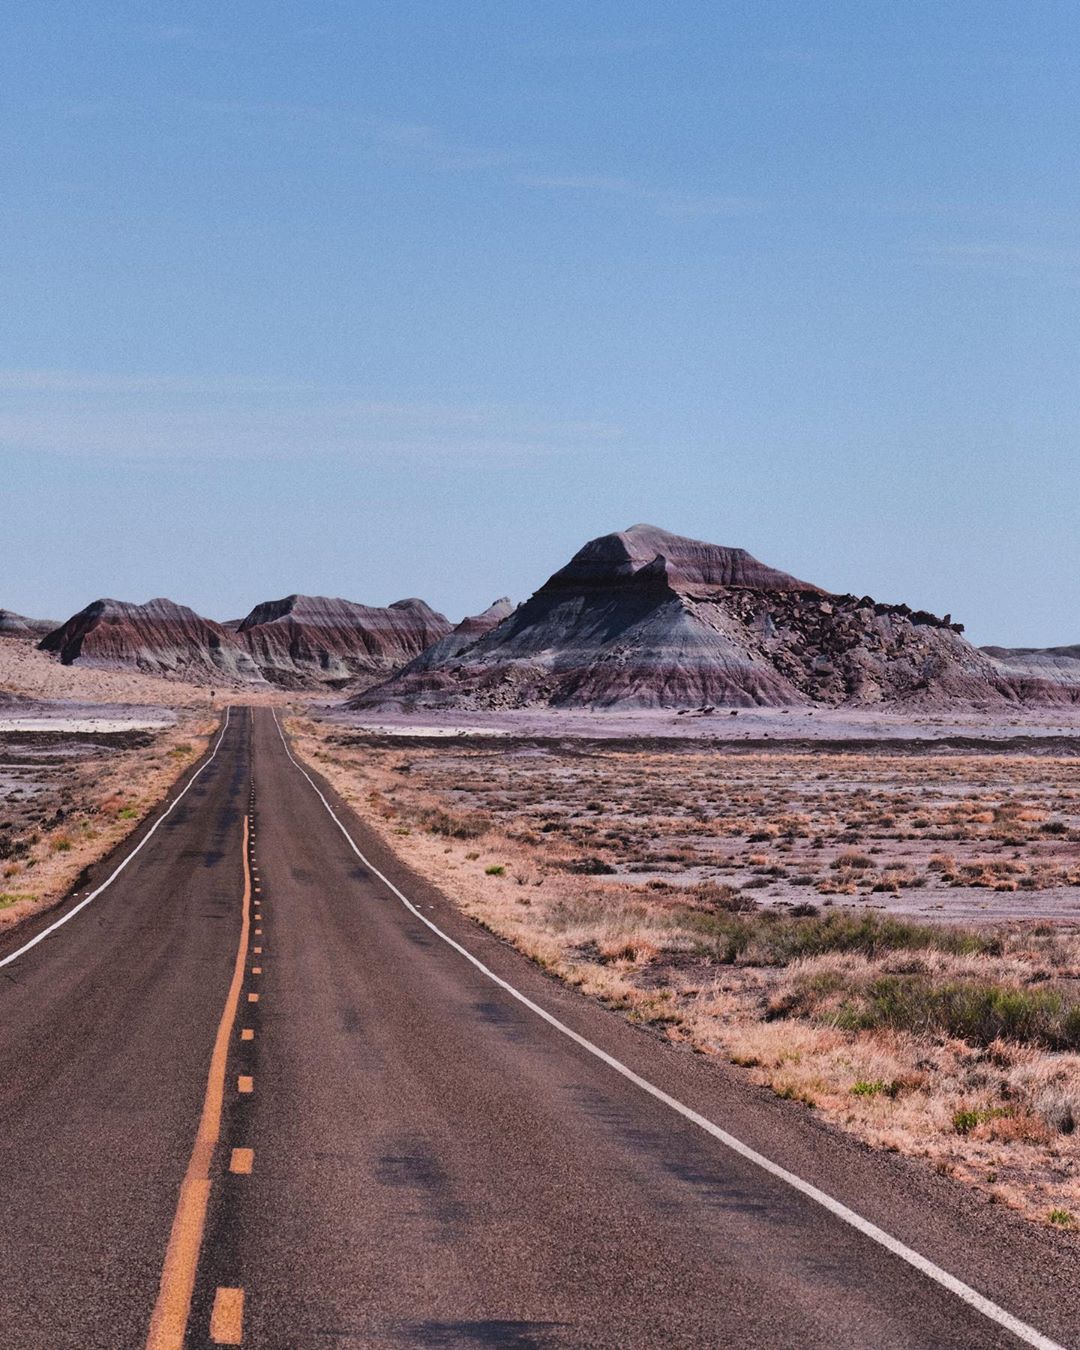 Outside of the Petrified Forest in Holbrook, AZ. Photo by Instagram user @roamingscott